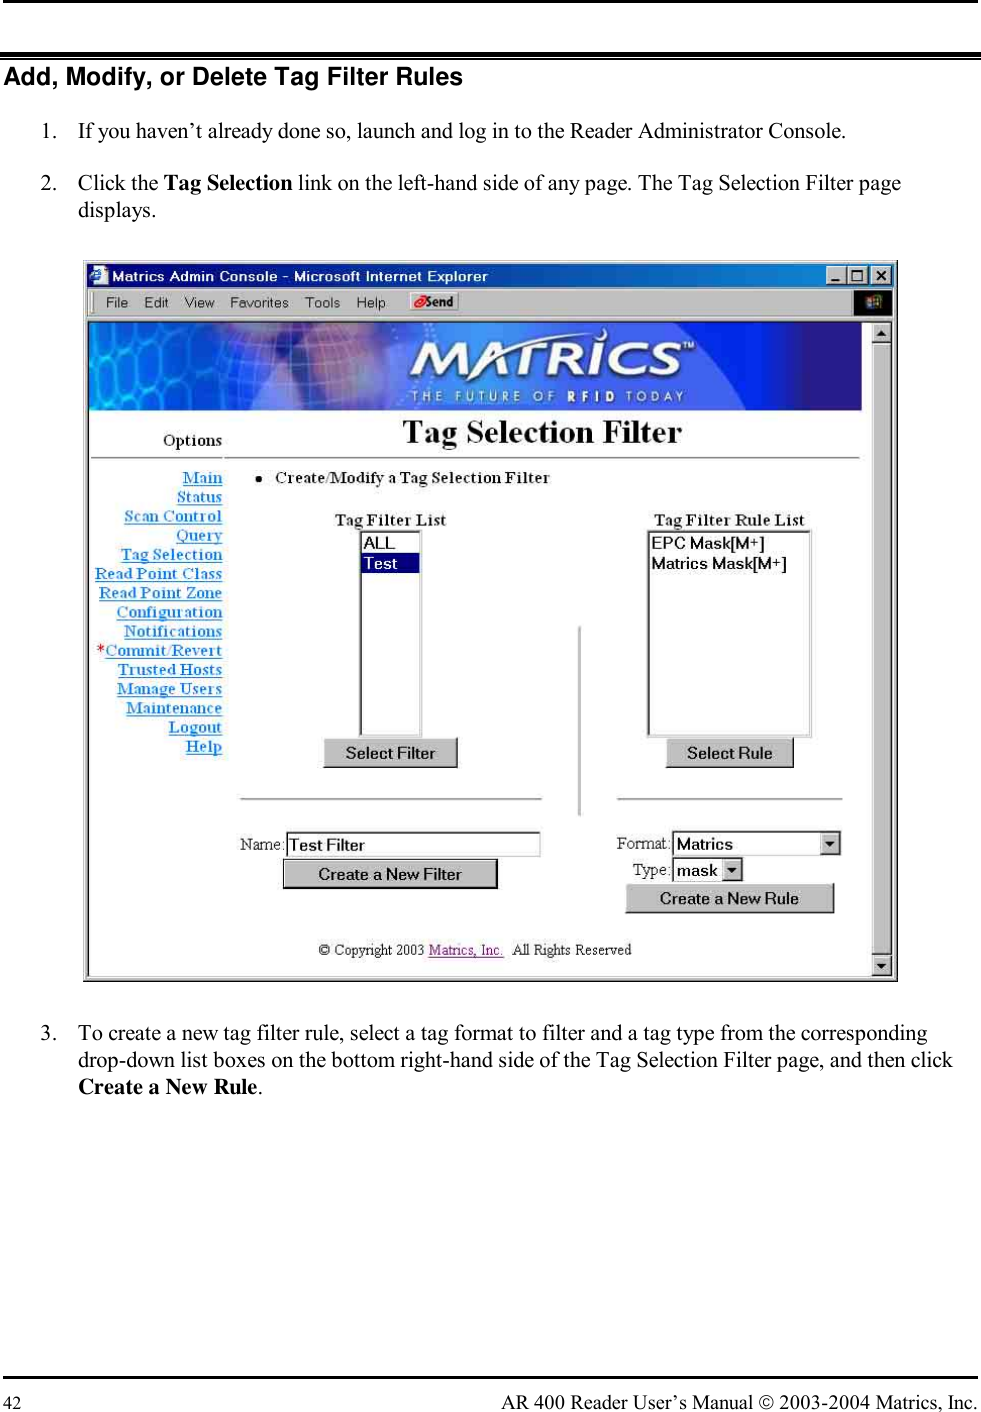  42  AR 400 Reader User’s Manual  2003-2004 Matrics, Inc. Add, Modify, or Delete Tag Filter Rules 1.  If you haven’t already done so, launch and log in to the Reader Administrator Console. 2. Click the Tag Selection link on the left-hand side of any page. The Tag Selection Filter page displays.  3.  To create a new tag filter rule, select a tag format to filter and a tag type from the corresponding drop-down list boxes on the bottom right-hand side of the Tag Selection Filter page, and then click Create a New Rule. 